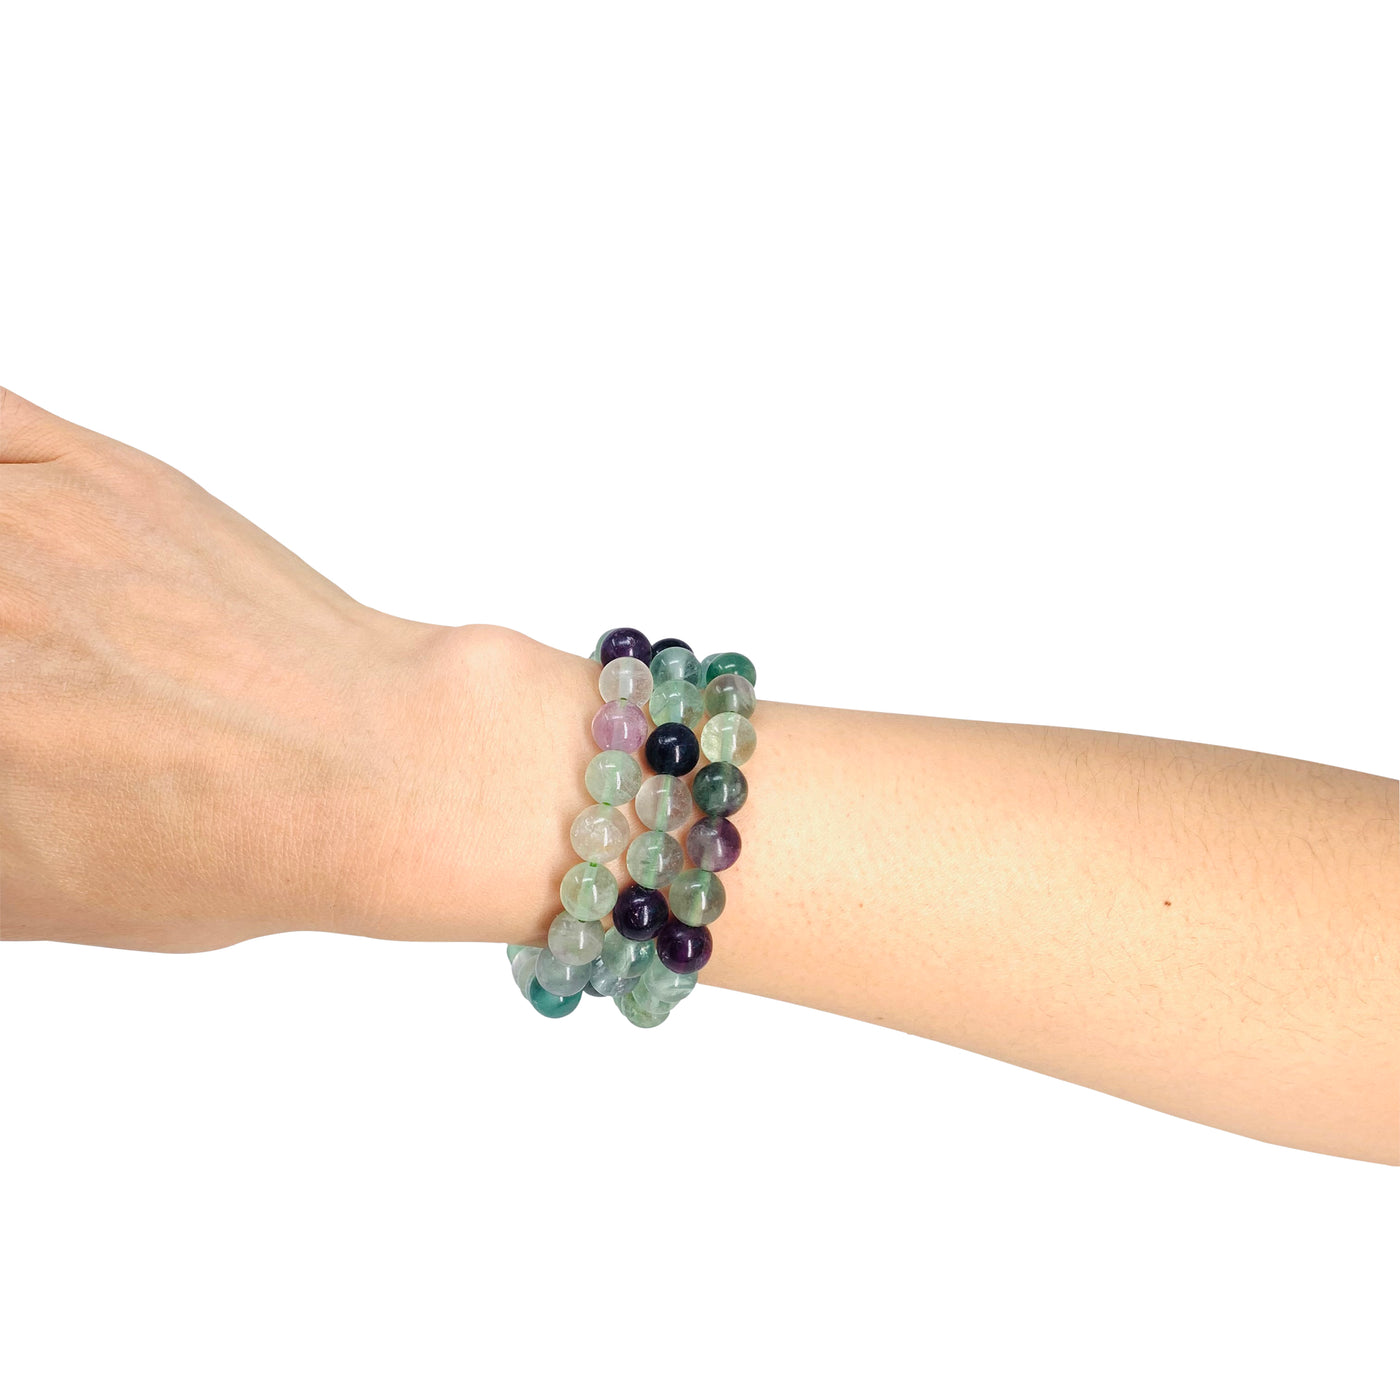 Rainbow Fluorite Crystal Bracelet for Women, Men | Bead Bracelet For Healing, Intuition, Clarity, Focus, Creativity | Crystal Bracelets with Meaning | Wholesale Dropshipping Crystal Bracelets